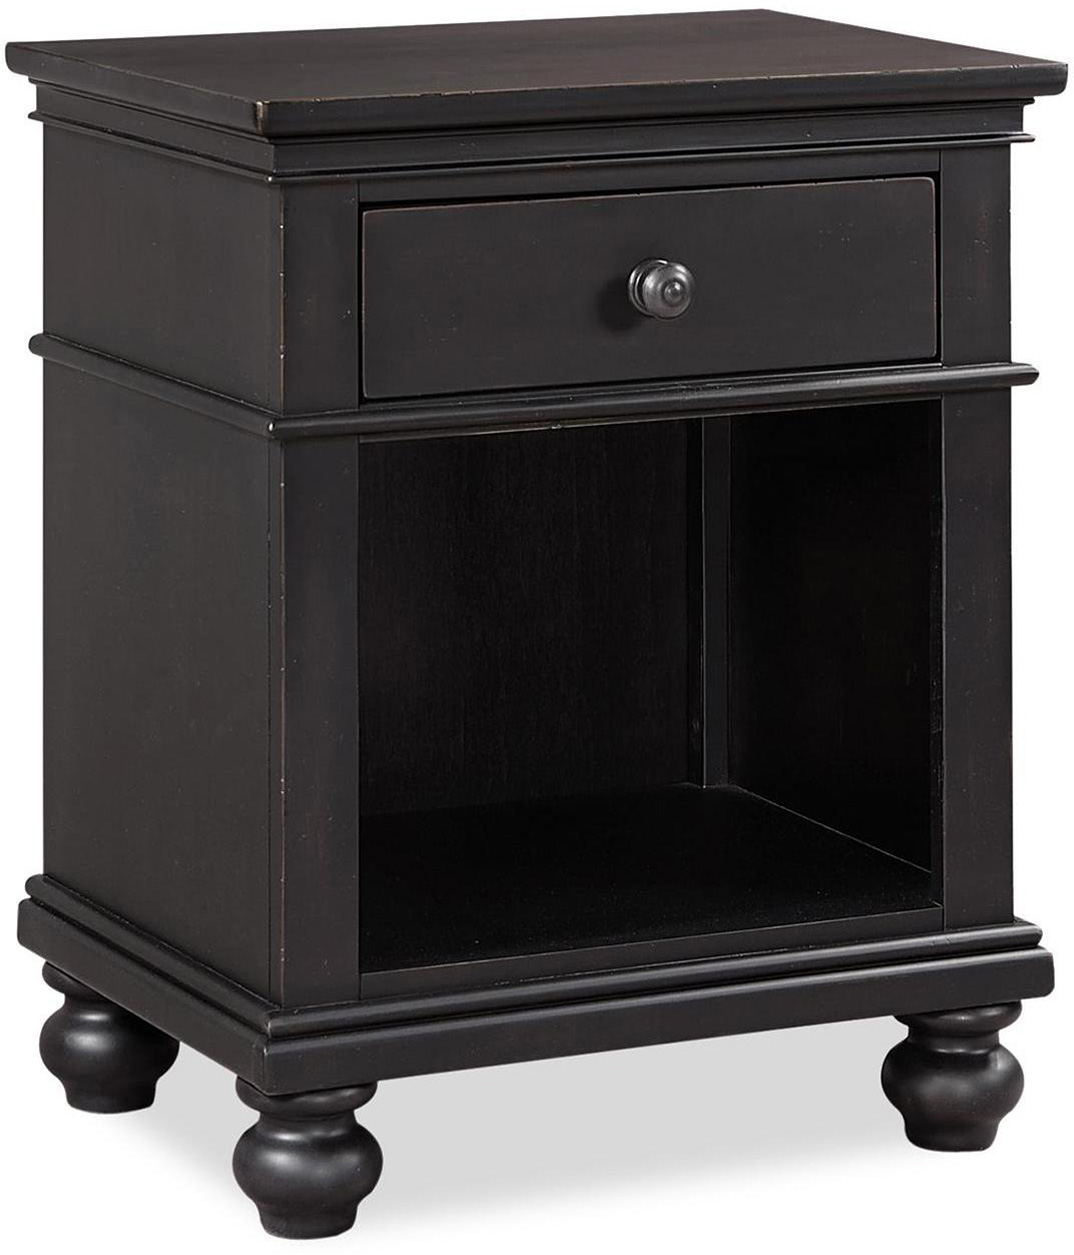 Oxford 1 Drawer Nightstand in the Rubbed Black finish